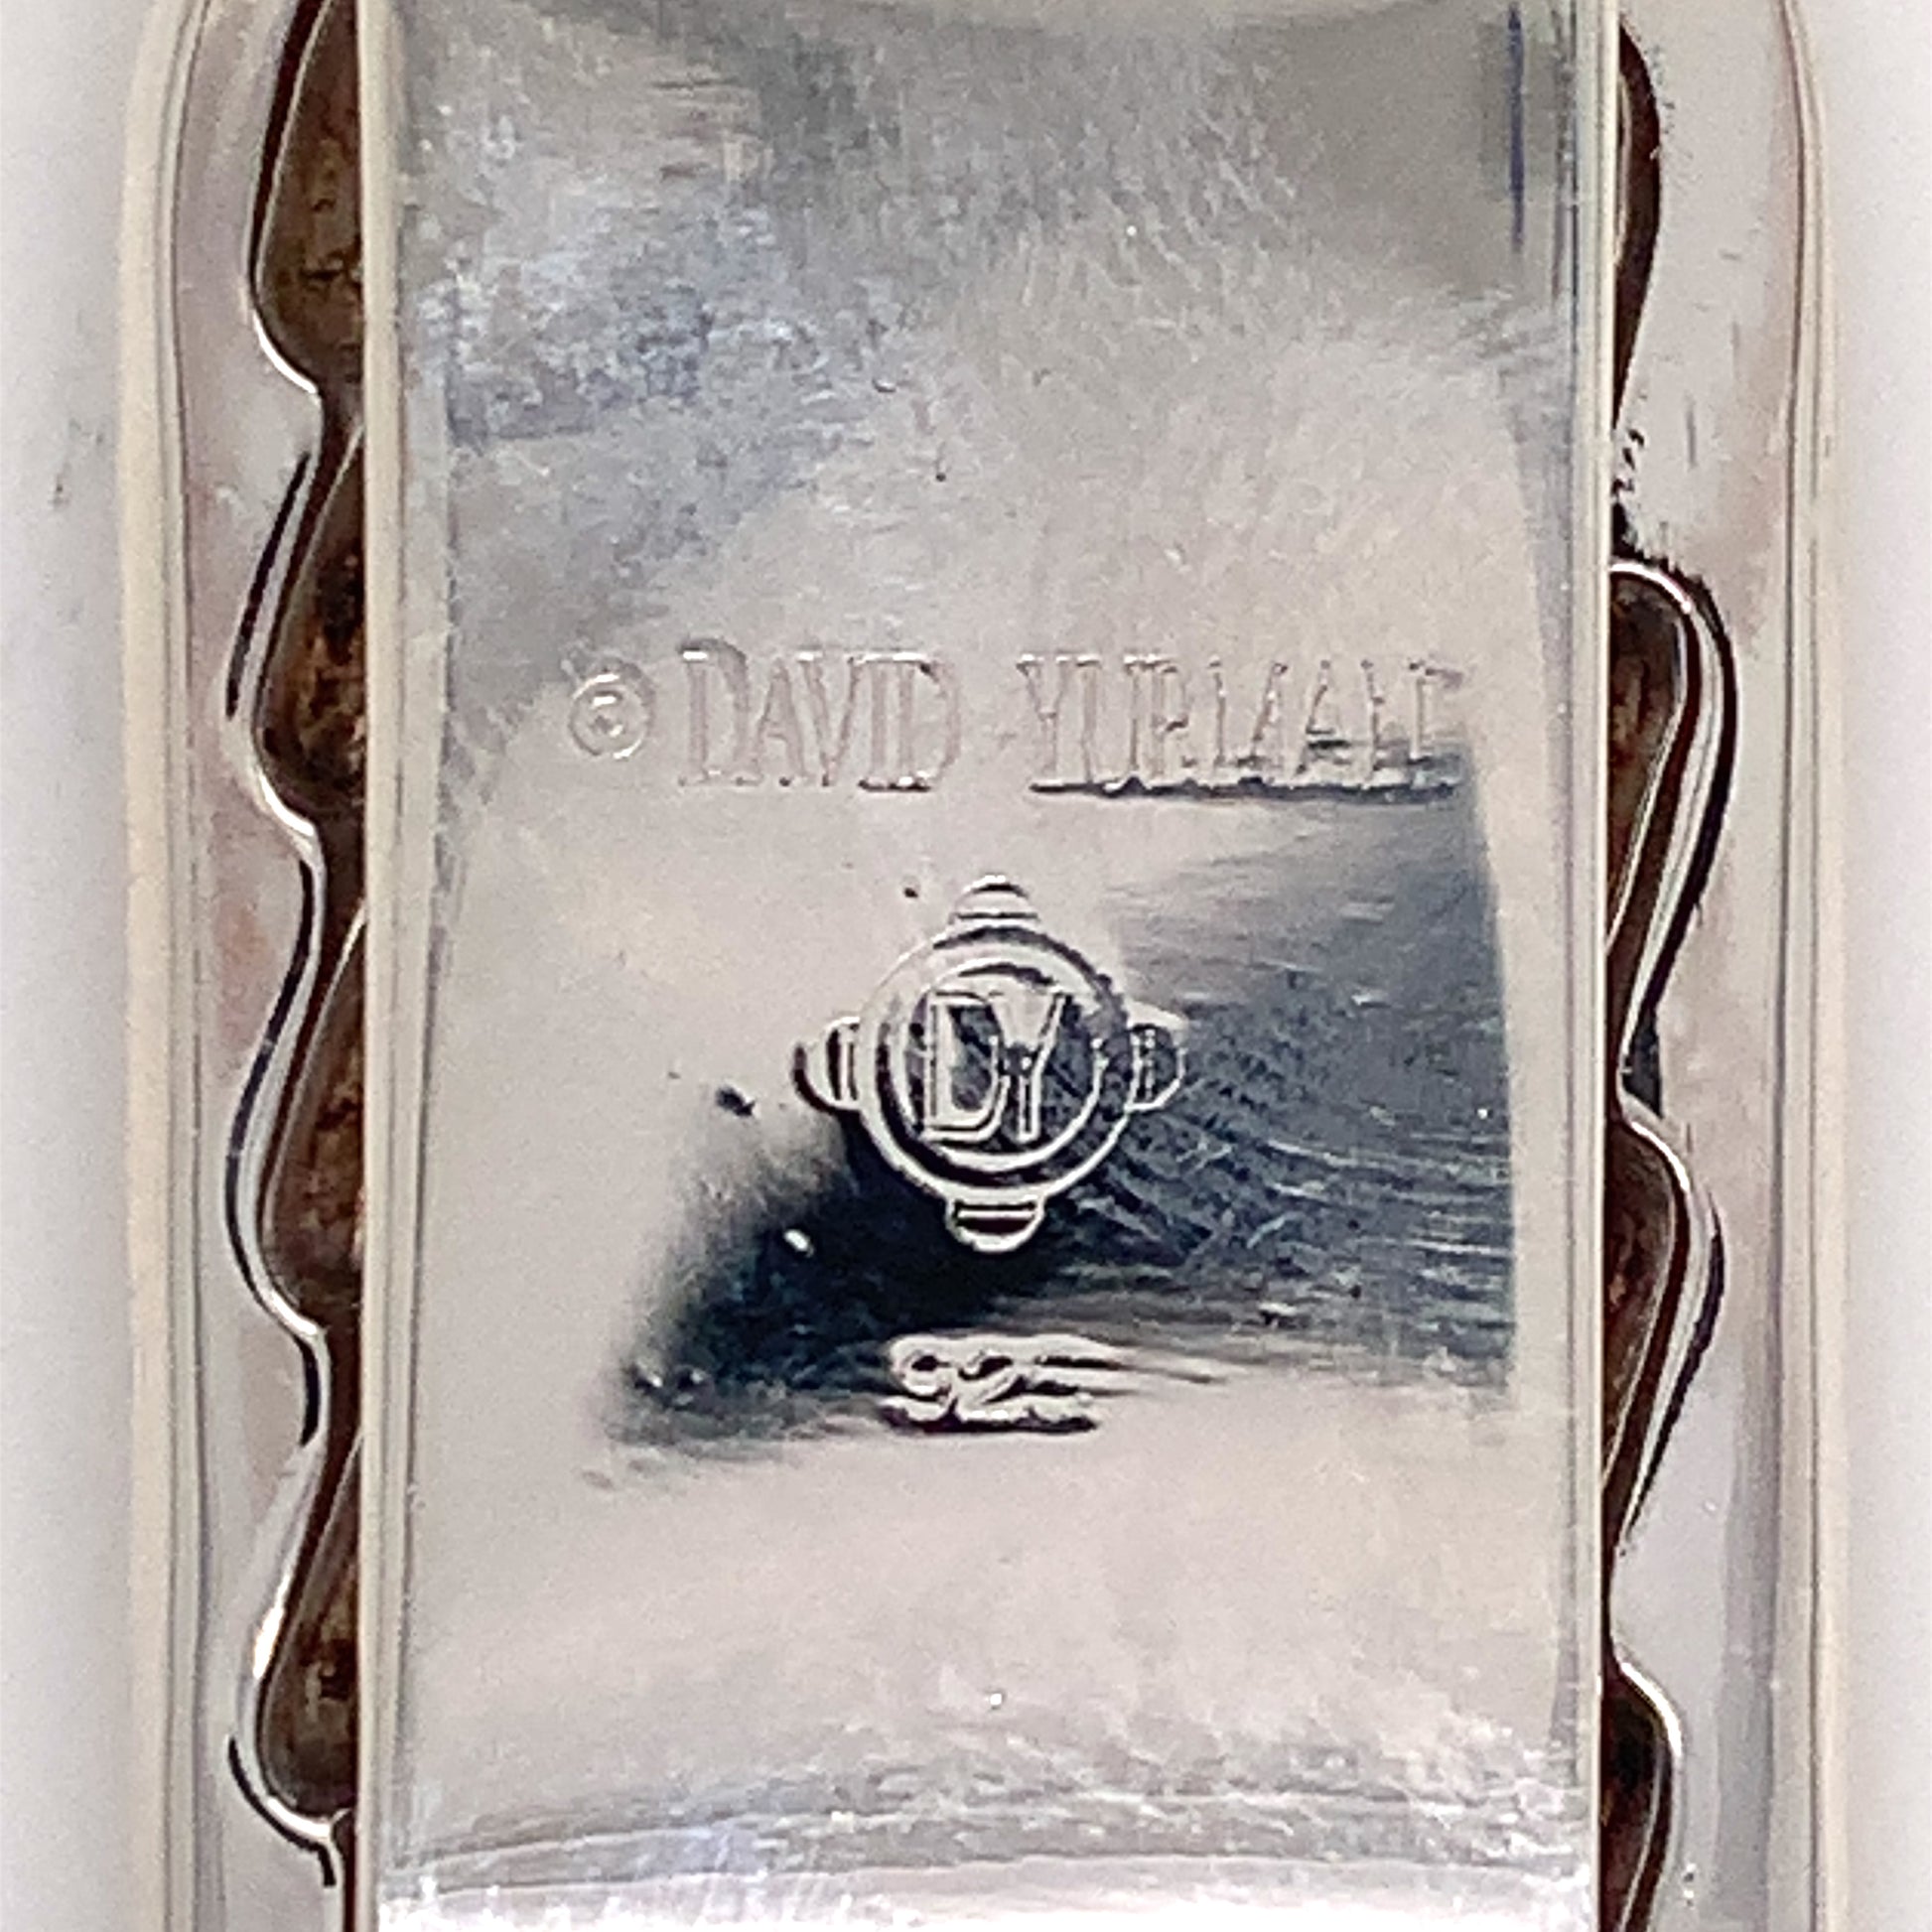 David Yurman Estate Large Cable Money Clip Sterling Silver DY125 - Certified Fine Jewelry